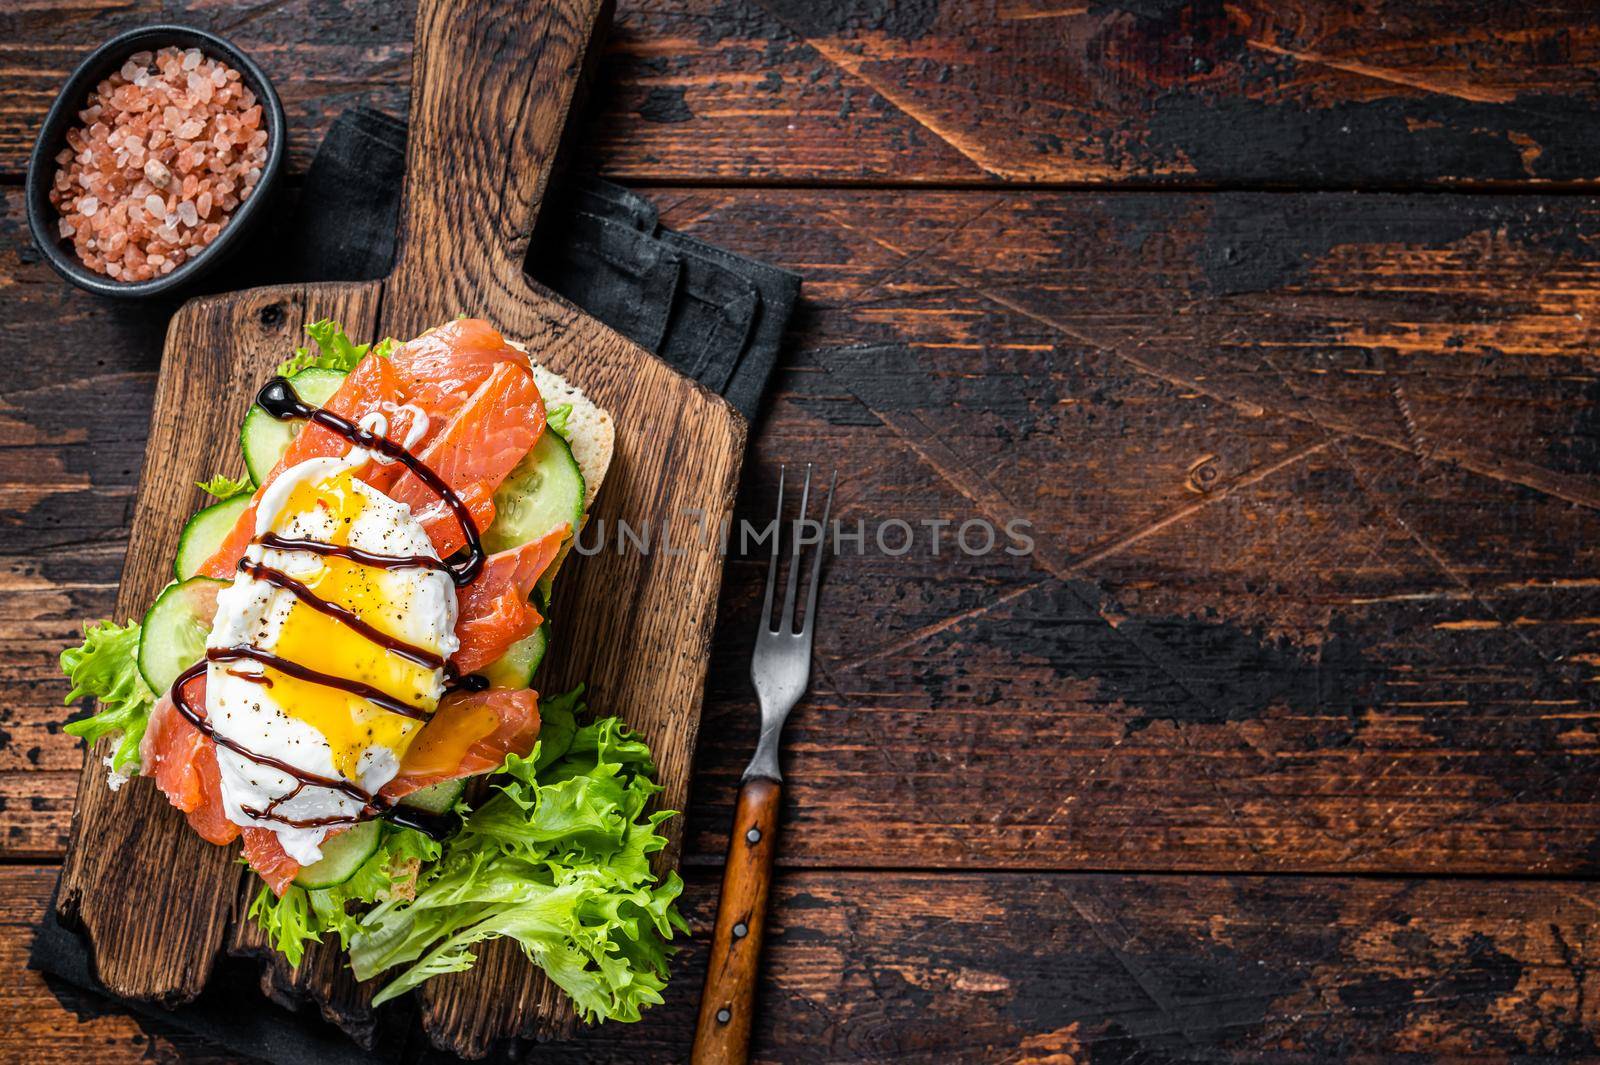 Smoked salmon Sandwich with Benedict egg and avocado on bread. Dark wooden background. Top view. Copy space.